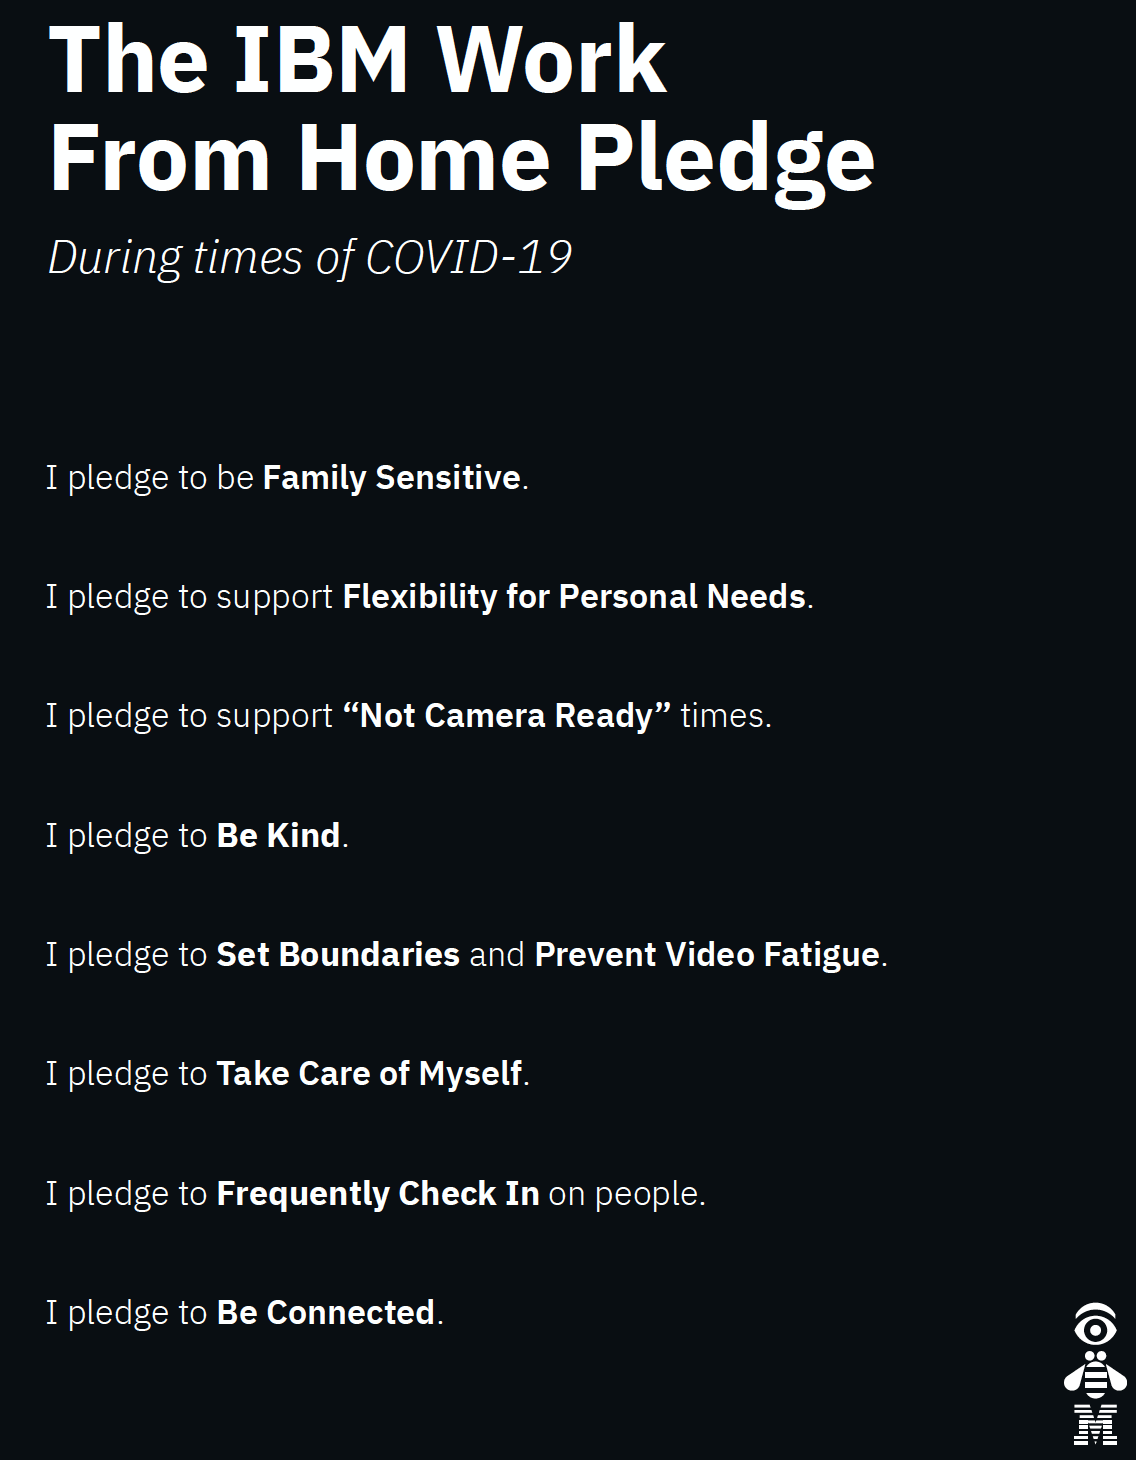 IBM work from home pledge, an image showcasing ideas for building a positive Remote Work Culture 